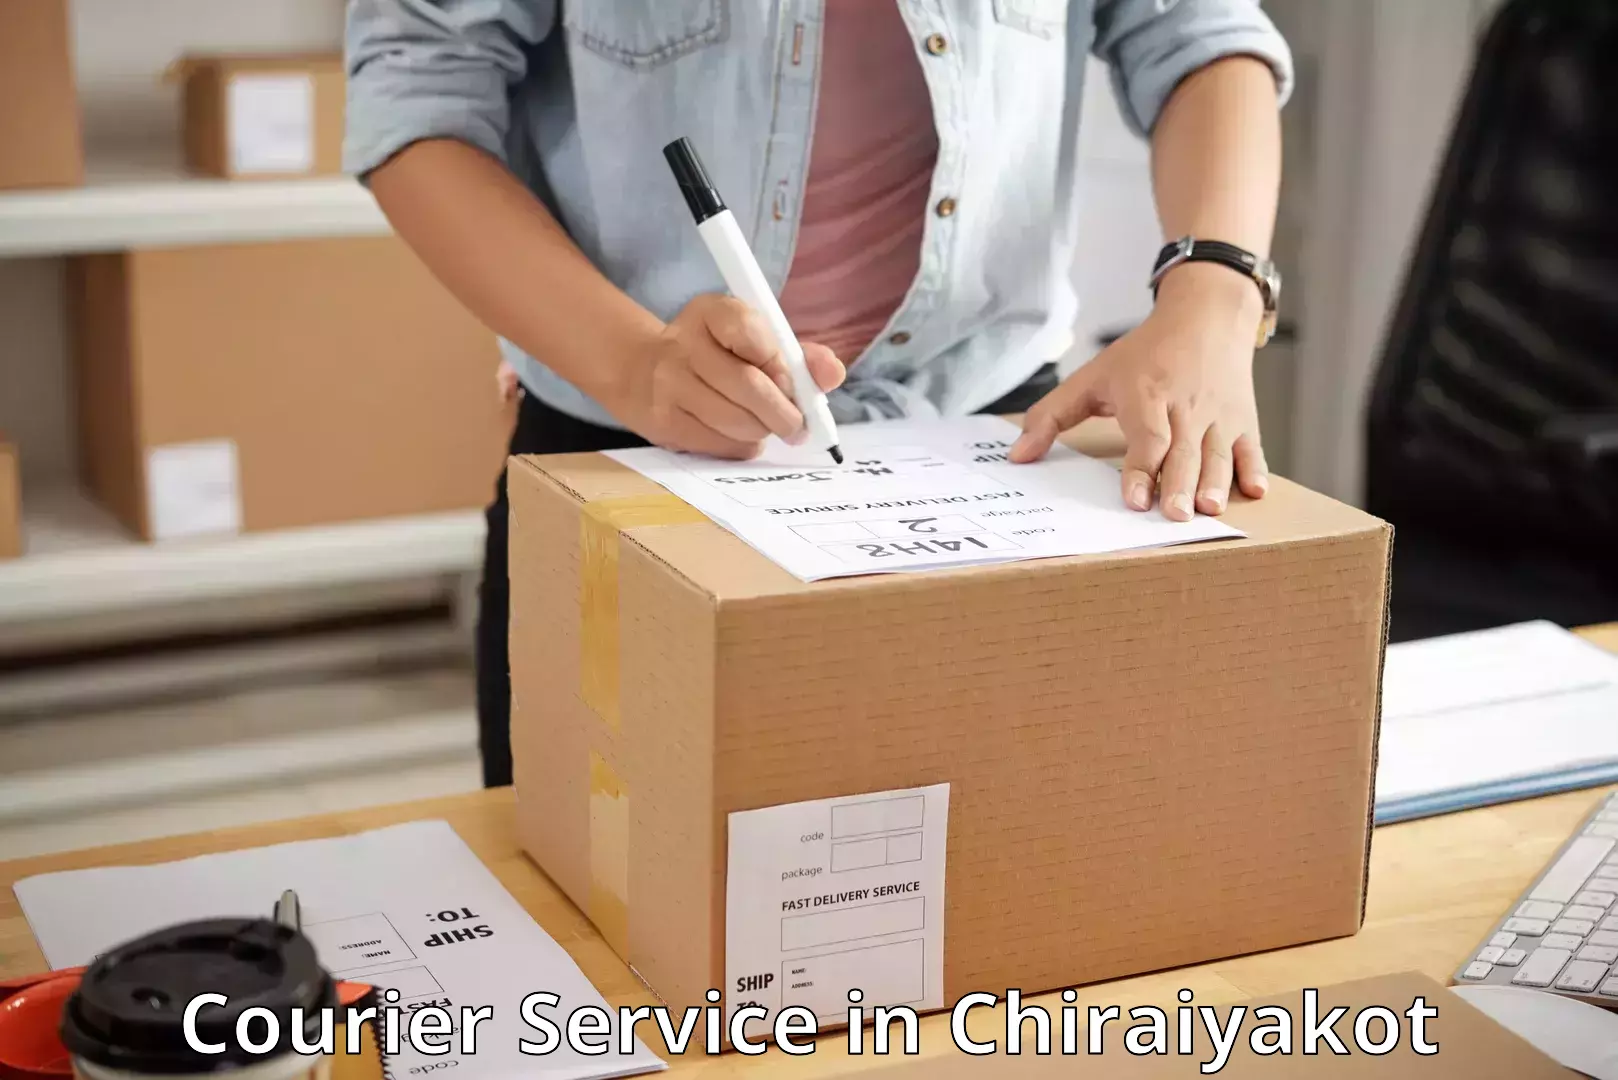 Reliable courier services in Chiraiyakot